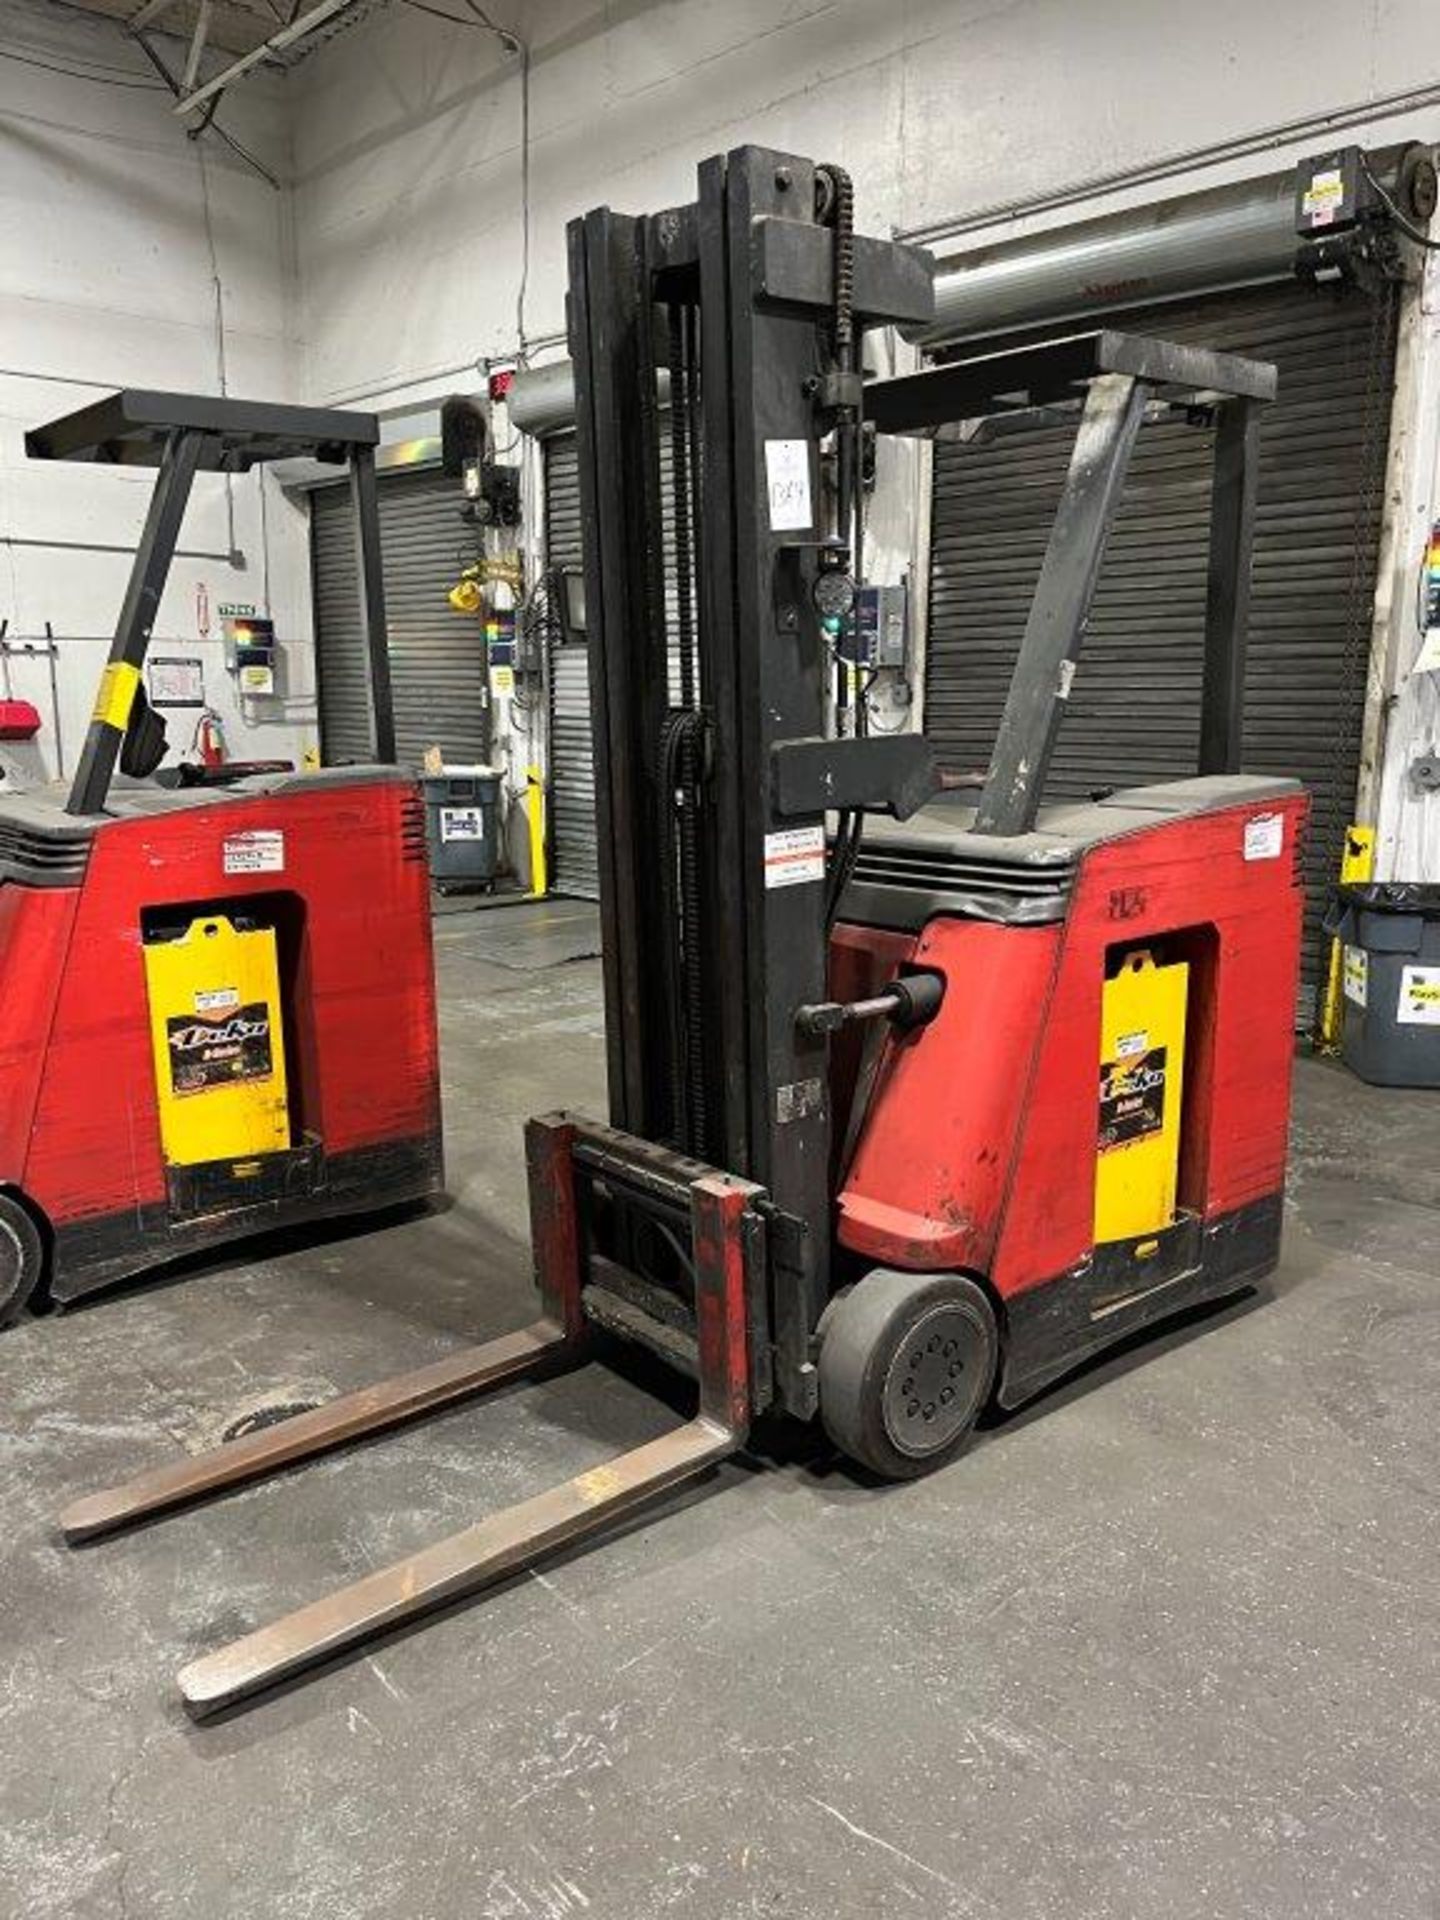 Raymond DSS300 3,000-Lb Capacity Standup Electric Forklift